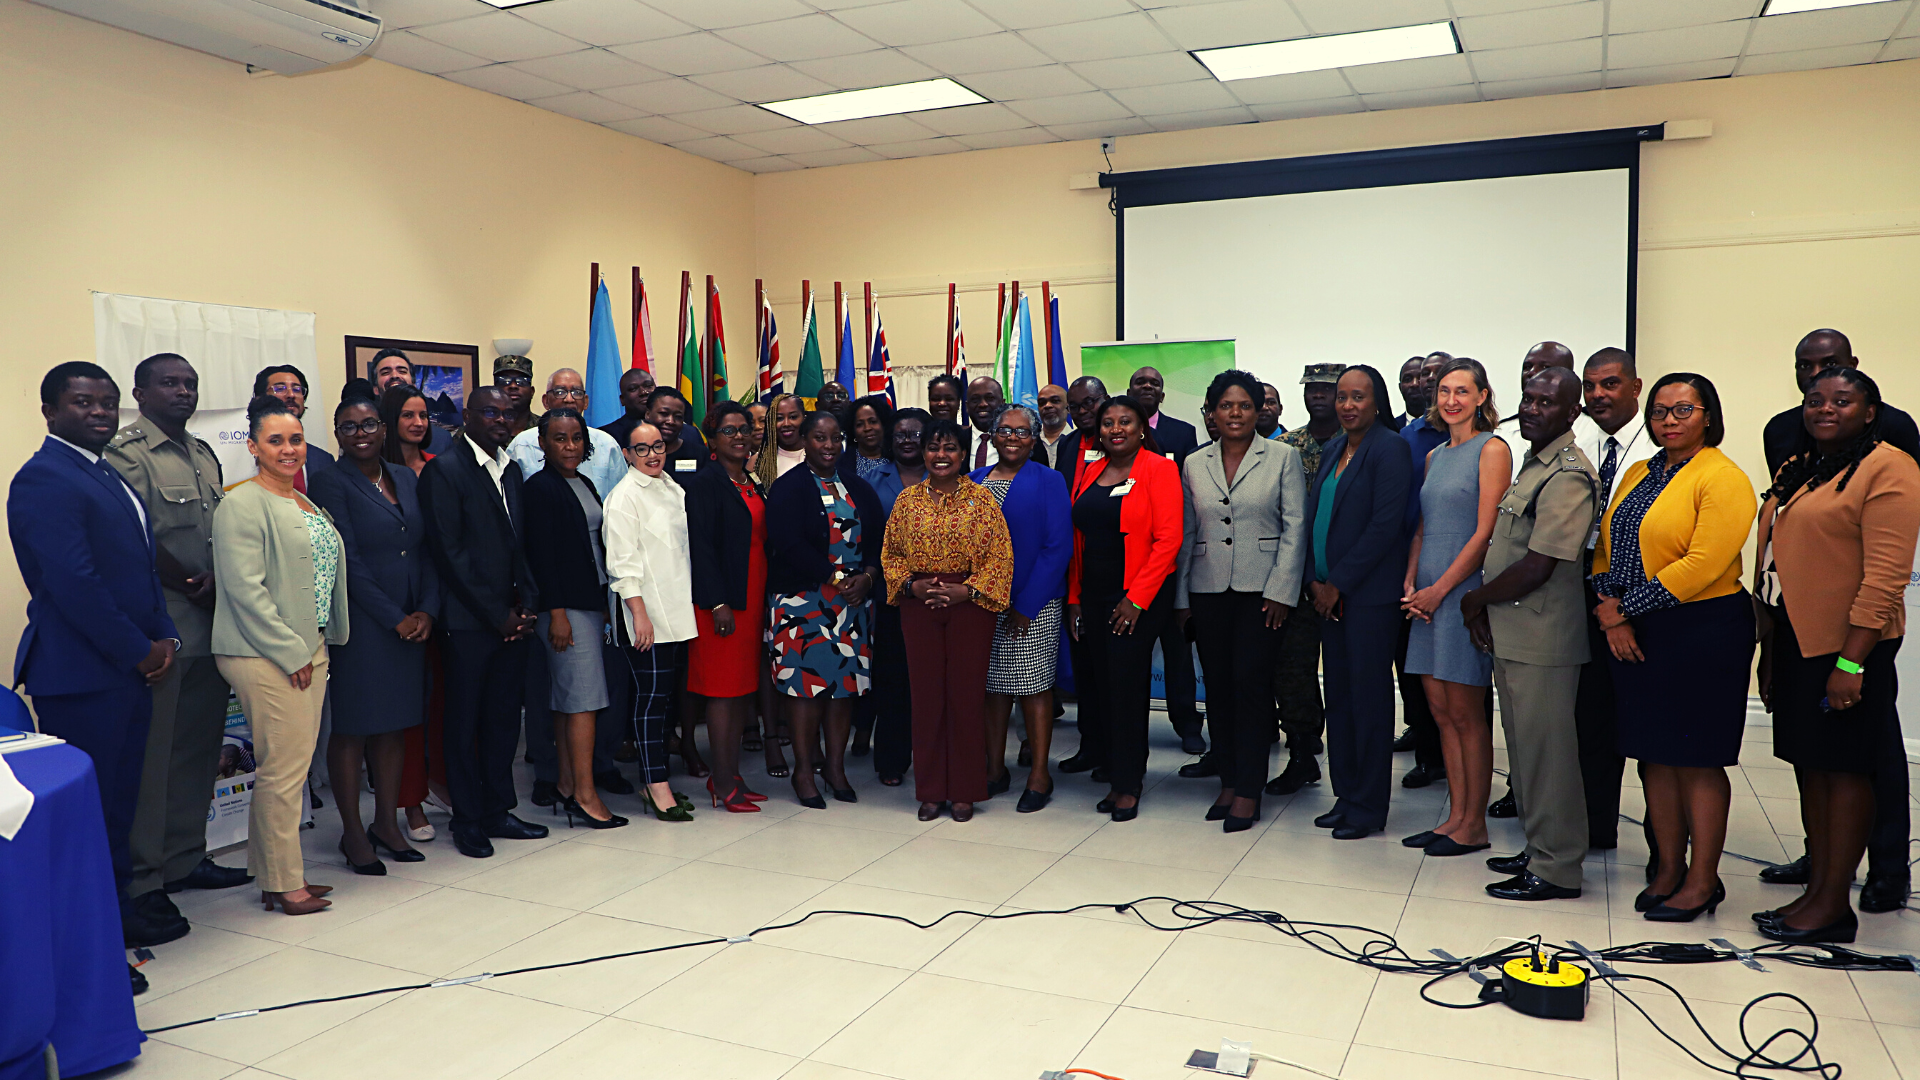 Climate Change, Disaster Displacement and Environmental Migration High on OECS-IOM Workshop Agenda